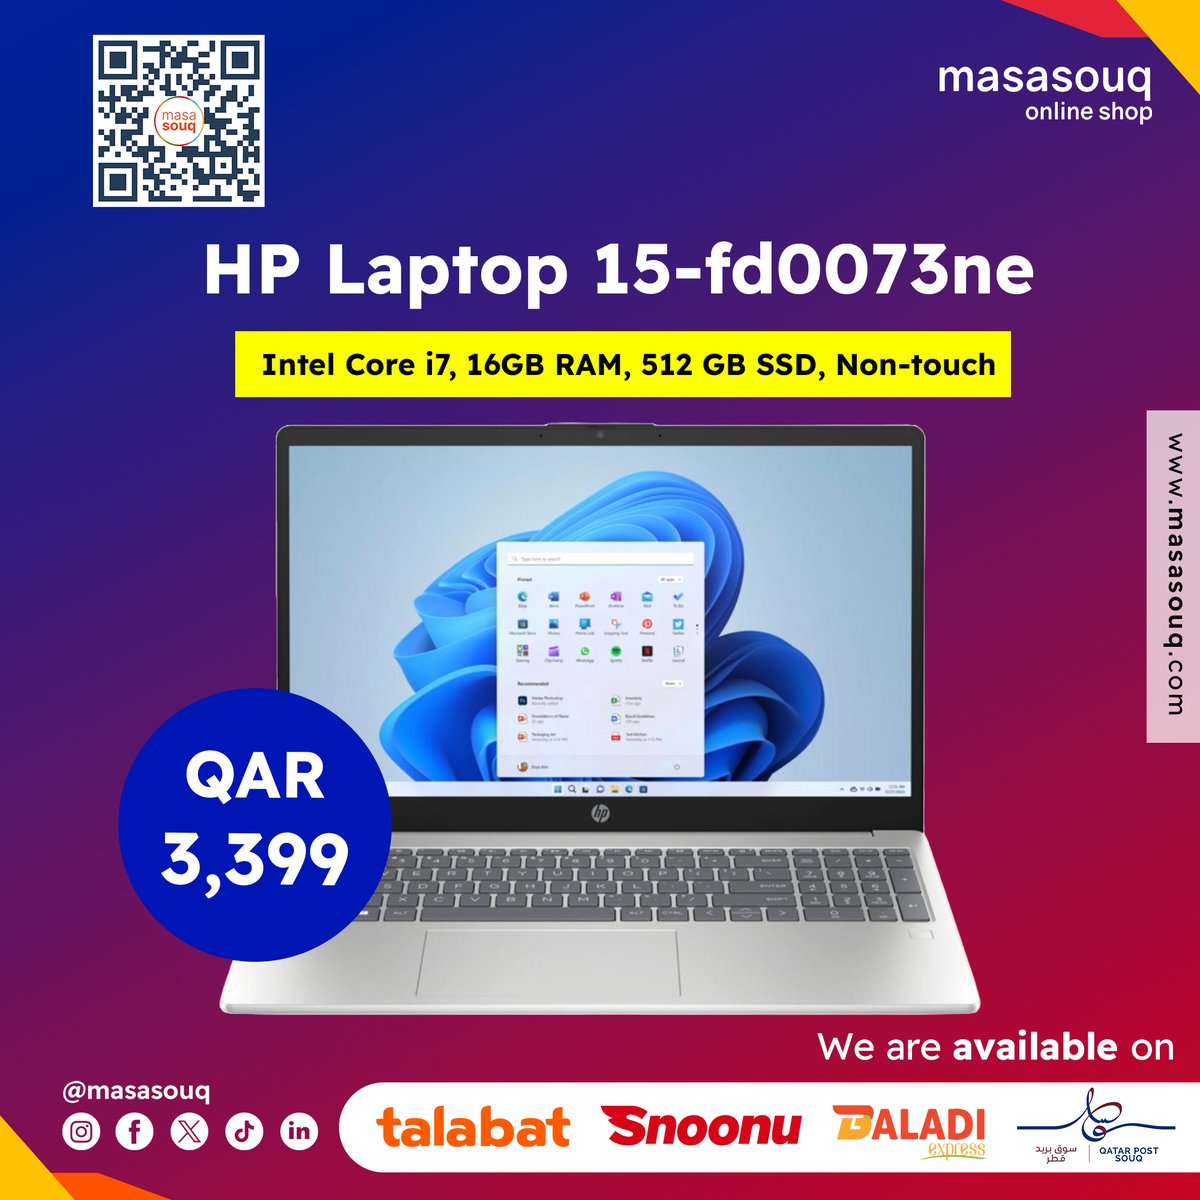 💥  Get the power you need for less! HP Laptop 15-fd0073ne  packs a punch with an Intel Core i7, ample storage & RAM!  Order yours today for QAR3,399  👉 masasouq.com/hp-laptop-15-f…   #HP #LaptopDeals #TechDeals #Masasouq #laptops